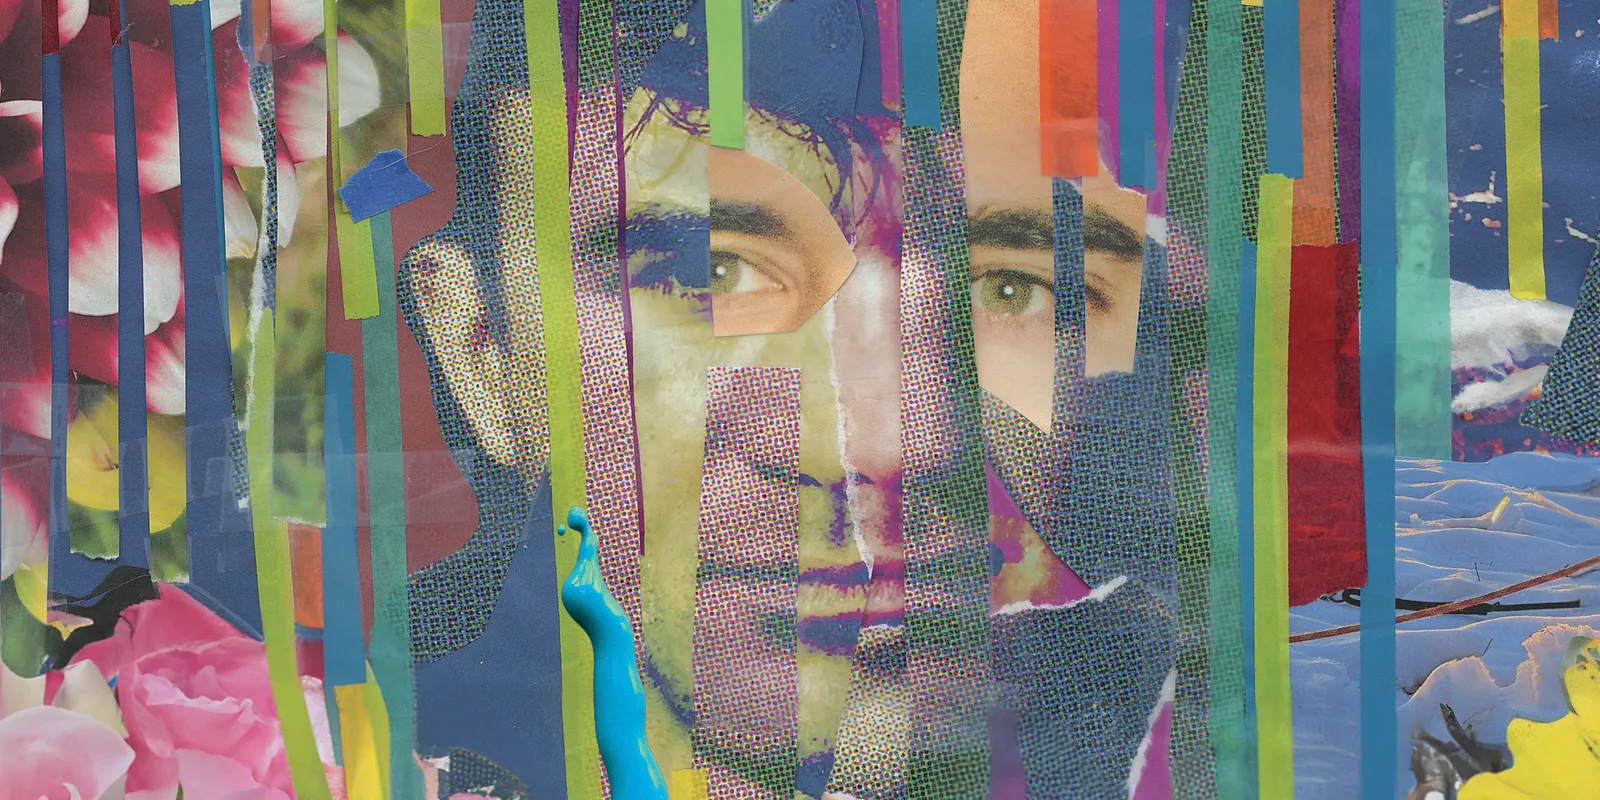 Sufjan Stevens Announces Upcoming Album "Javelin" and Releases Lead Single "So You Are Tired"